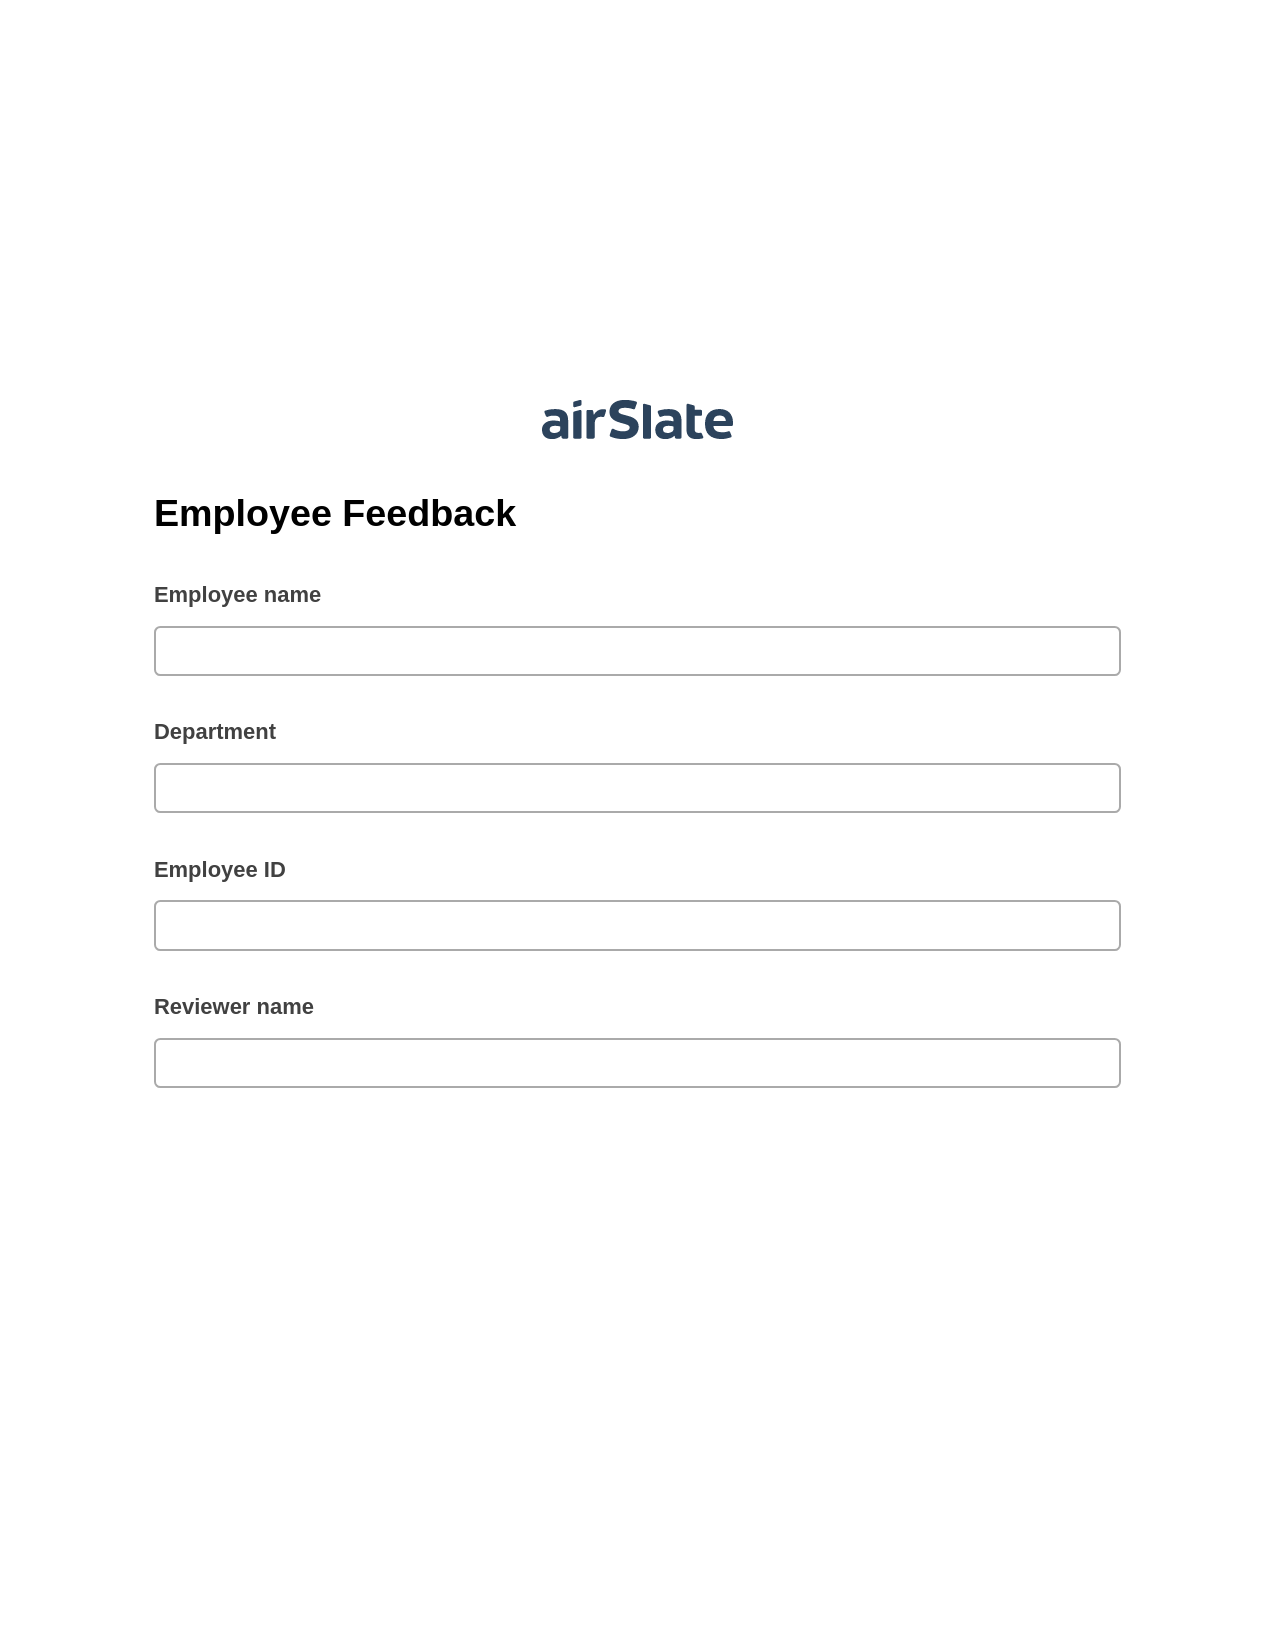 Employee Feedback Pre-fill from CSV File Bot, Unassign Role Bot, OneDrive Bot